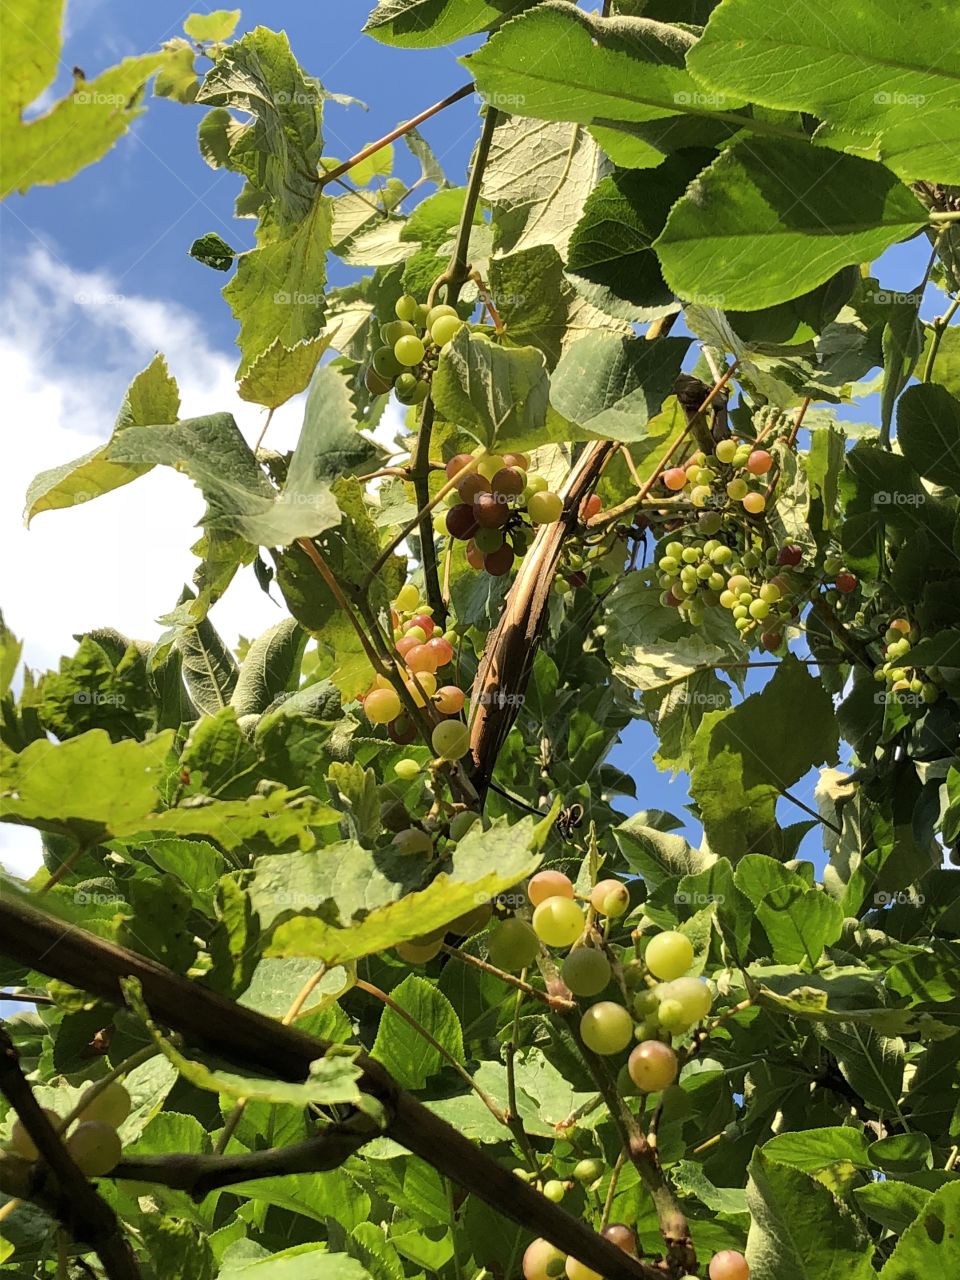 Yes, if you take good care, you can grow lots of grapes in Chicago! Time to harvest them, some are so ripe and yet others a brilliant green and sour! We need to fight the squirrels & cranky birds to get our own grapes!